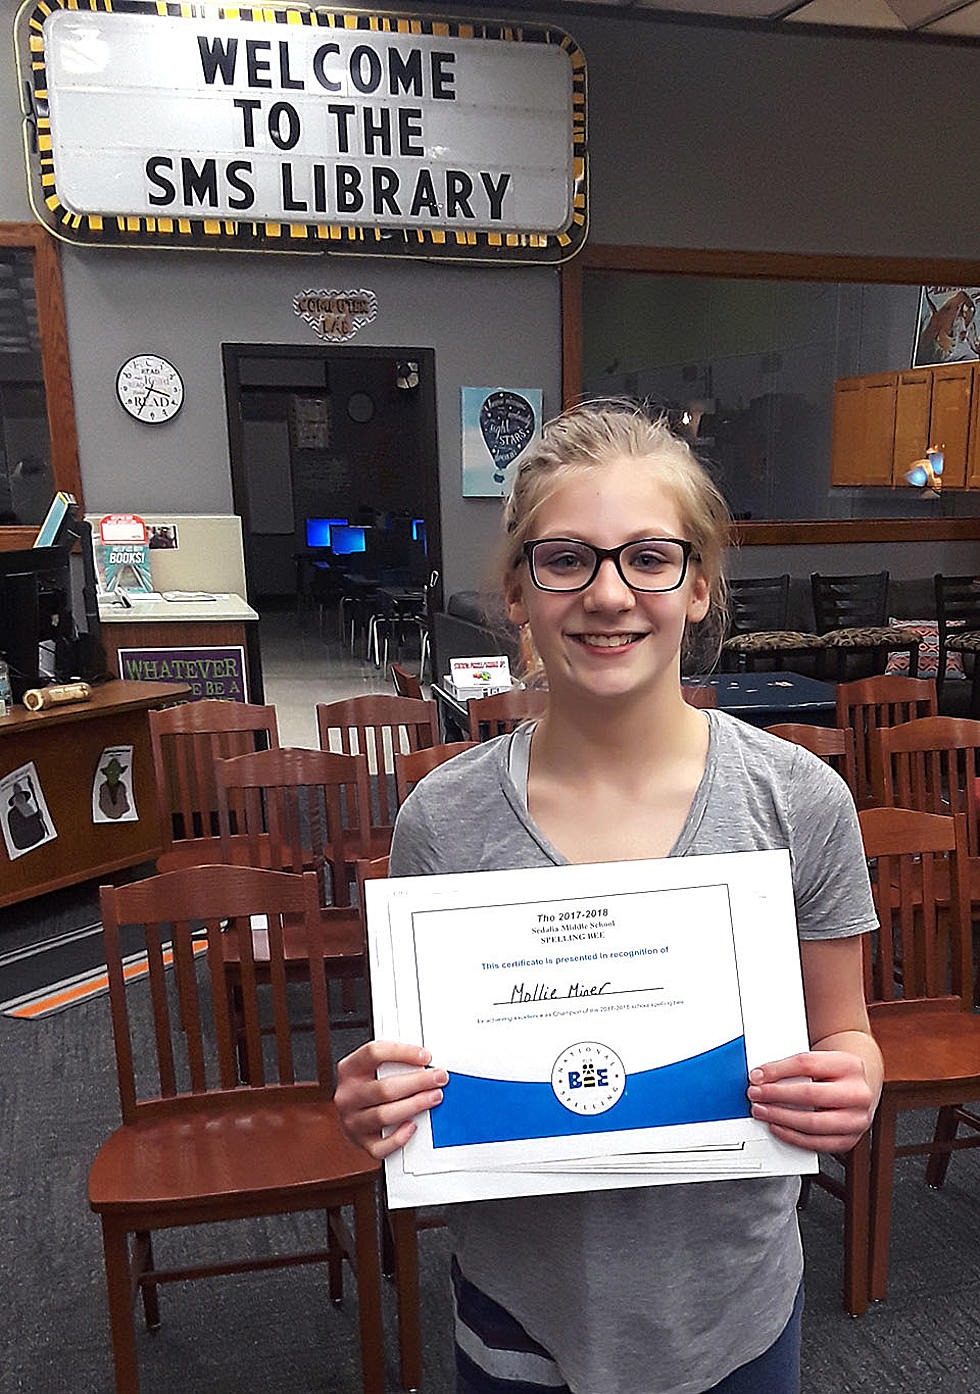 Sedalia Student Wins SMS Spelling Bee, Earns Trip to Nationals